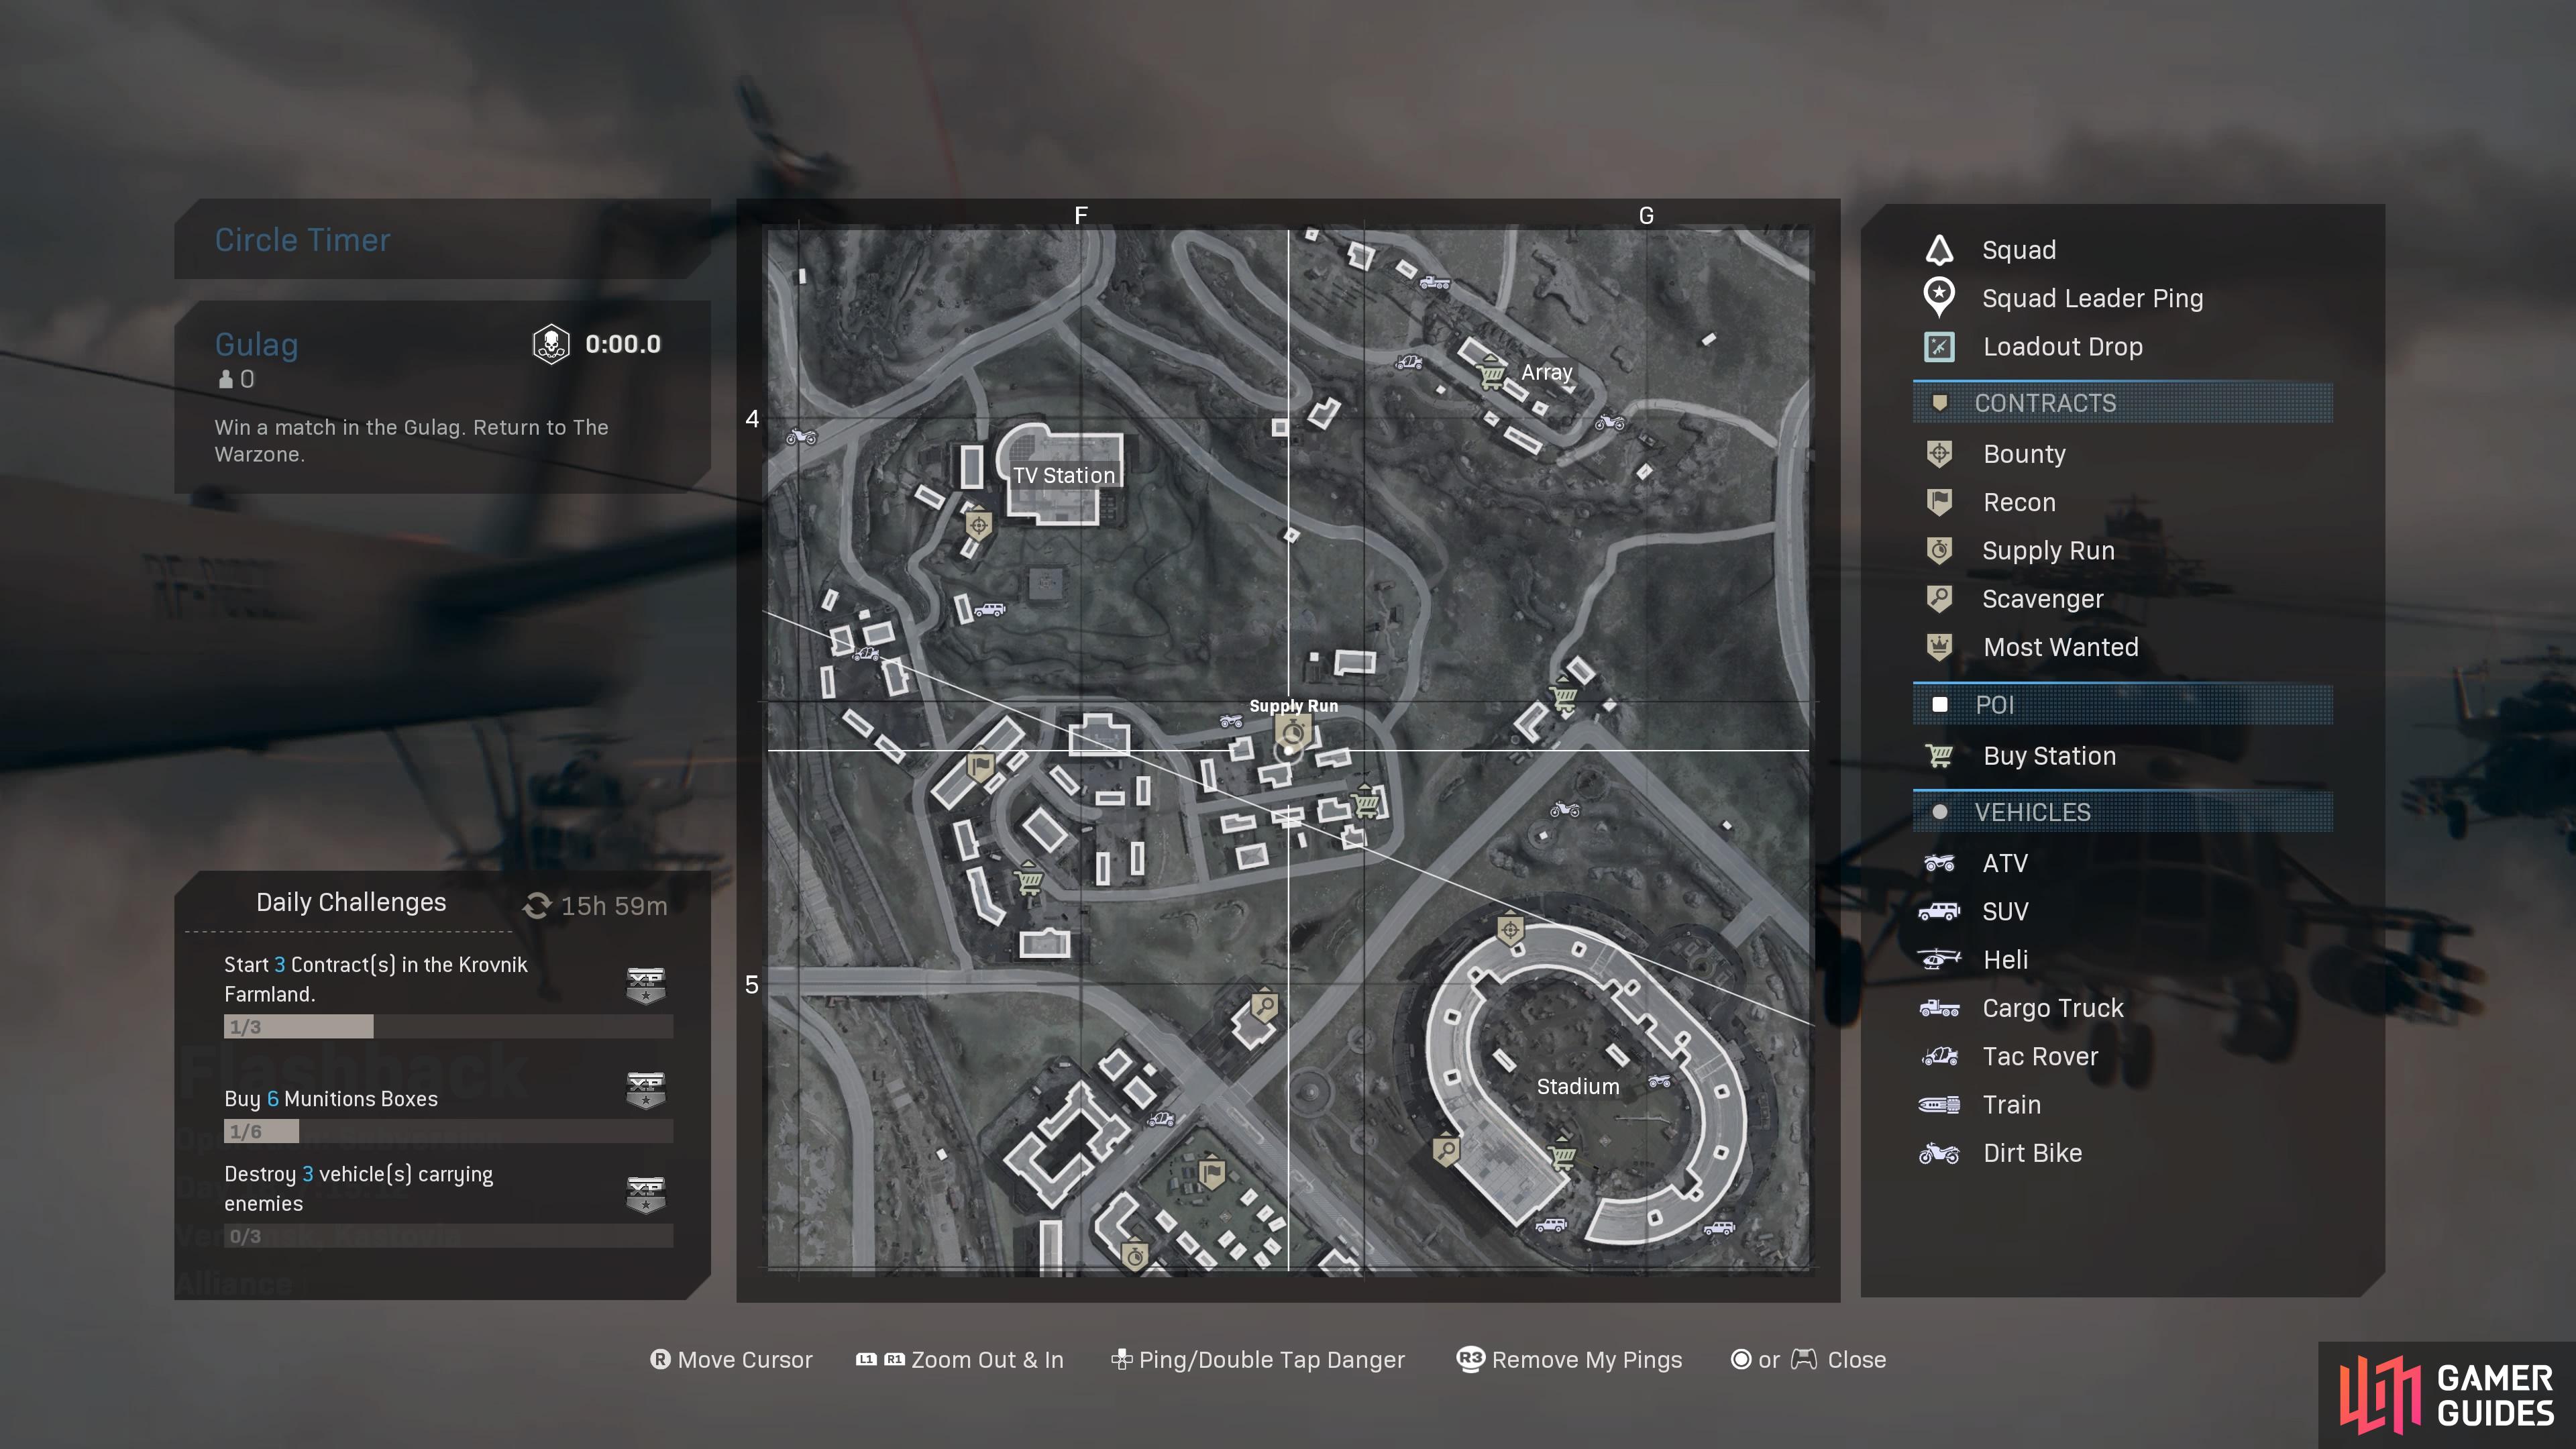 Contract Icons on the Map. 